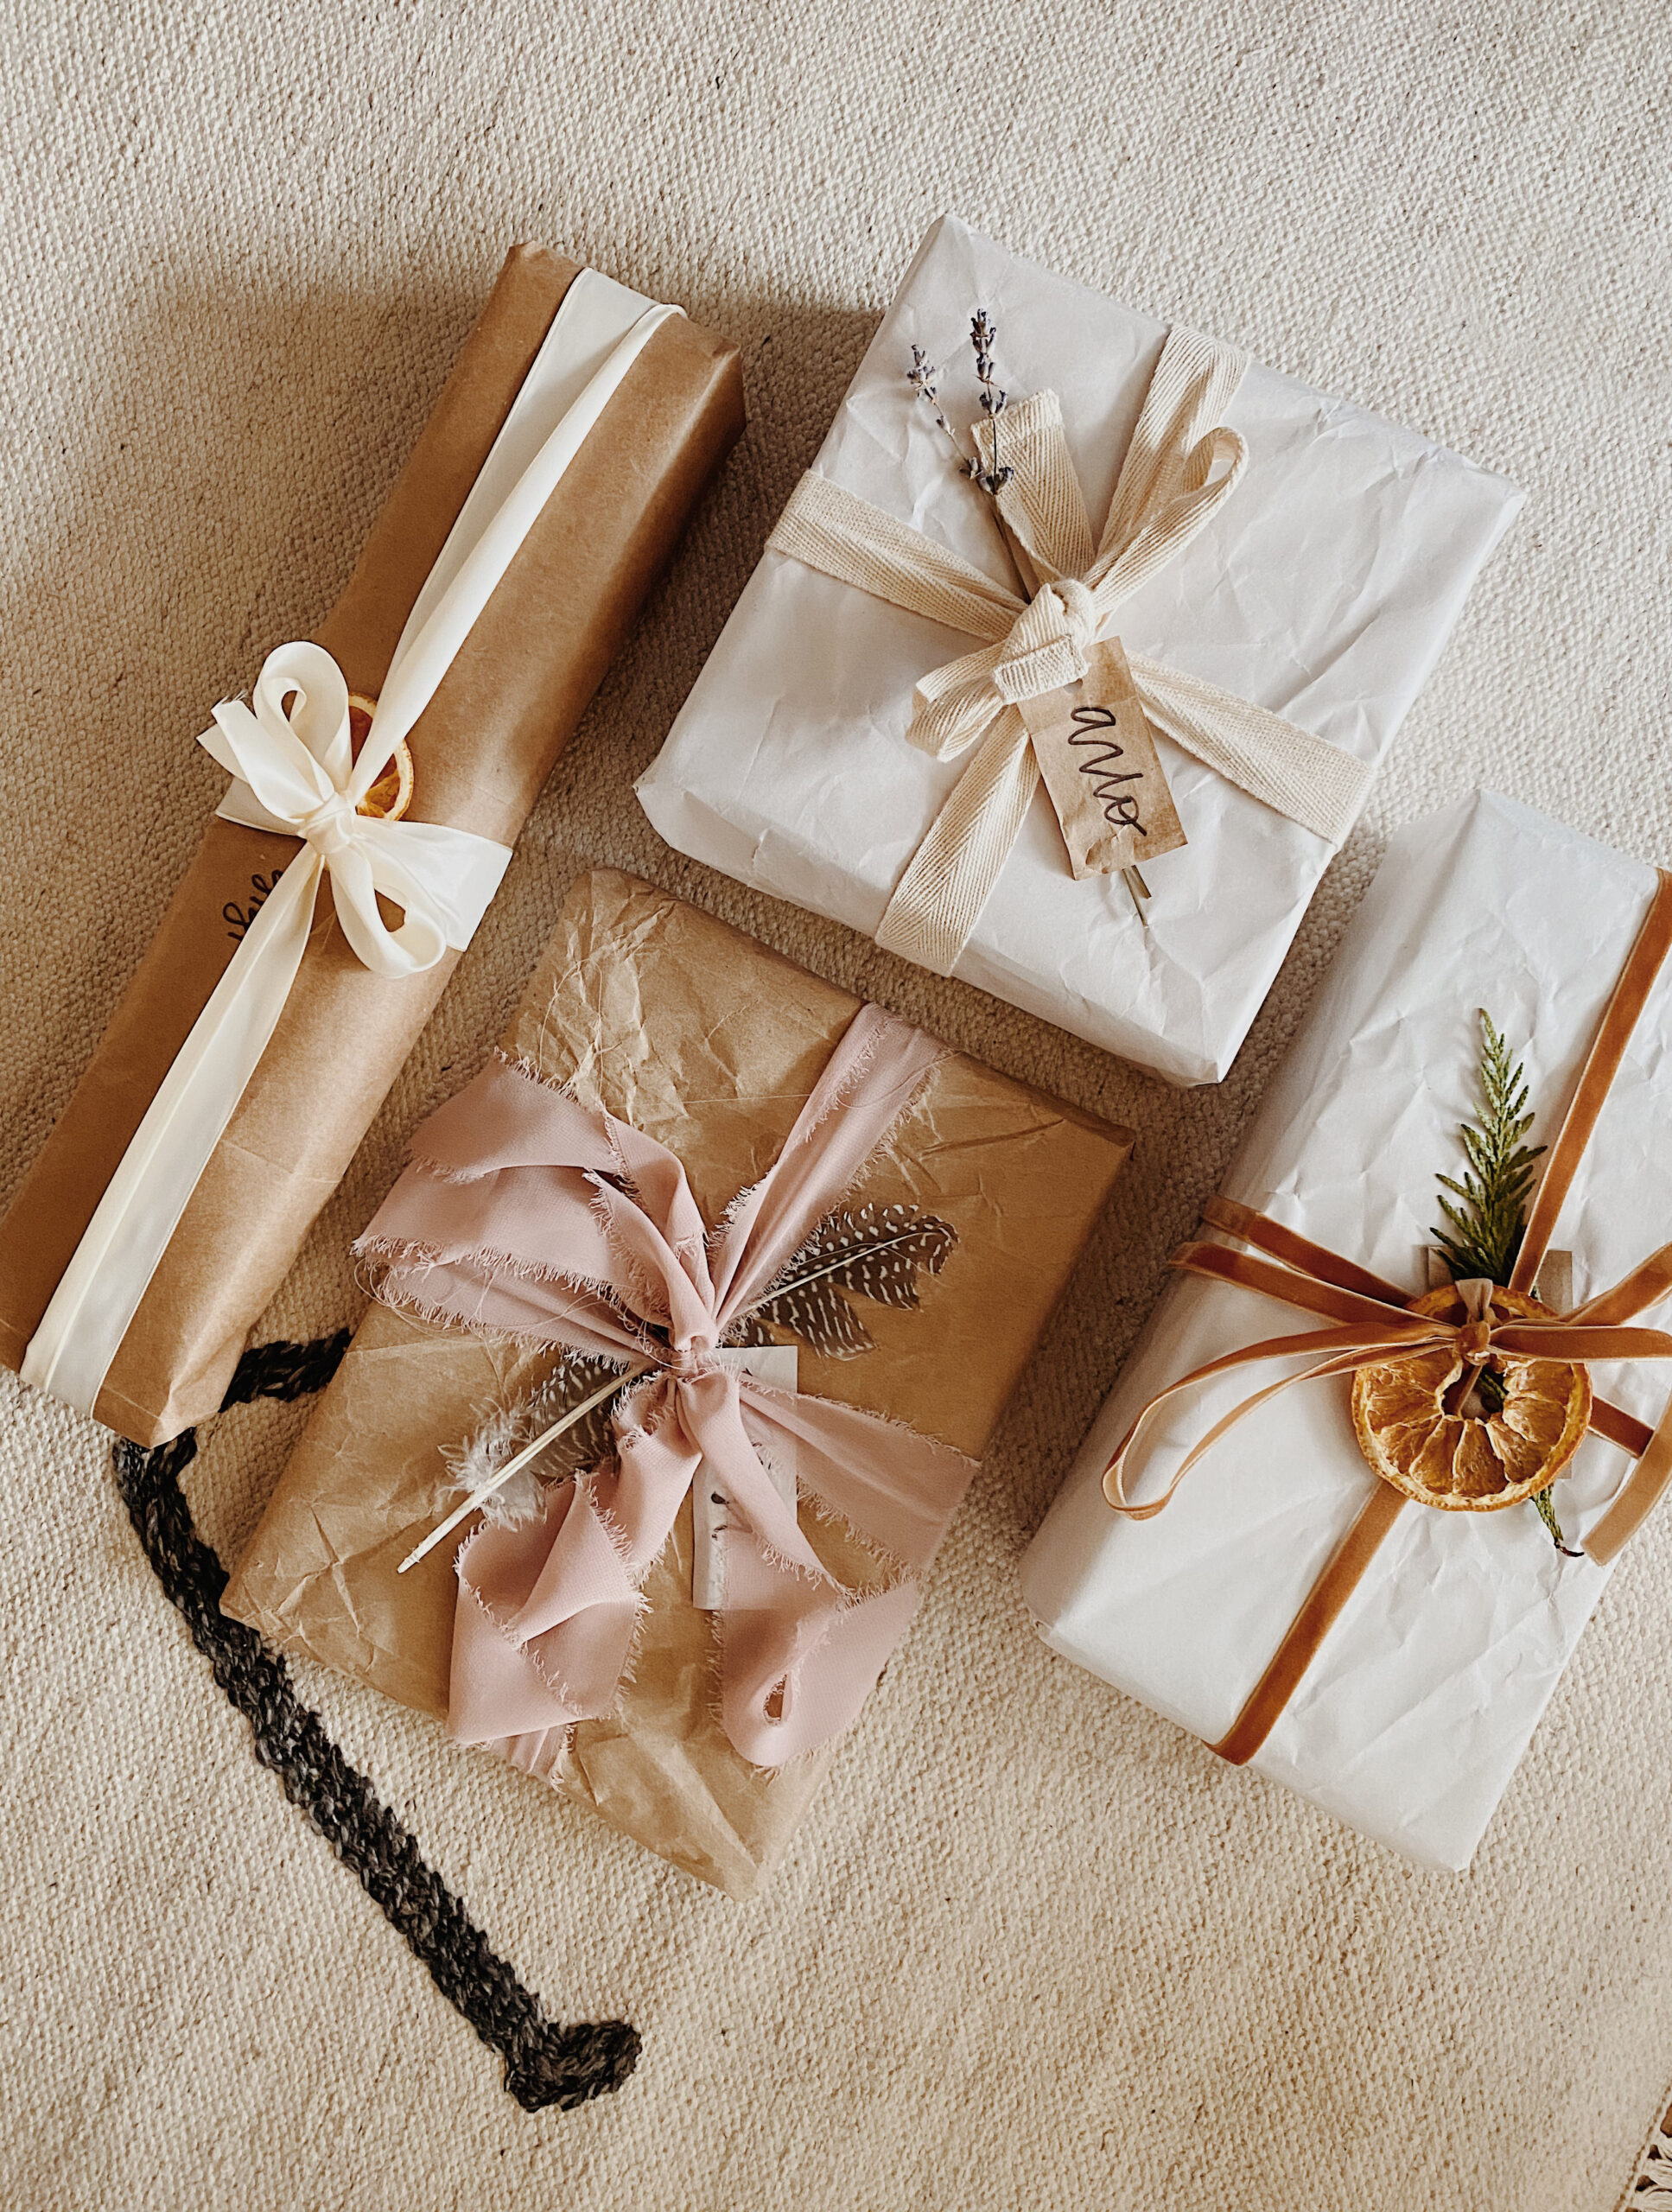 Inexpensive Gift Wrapping Ideas that look stunning!